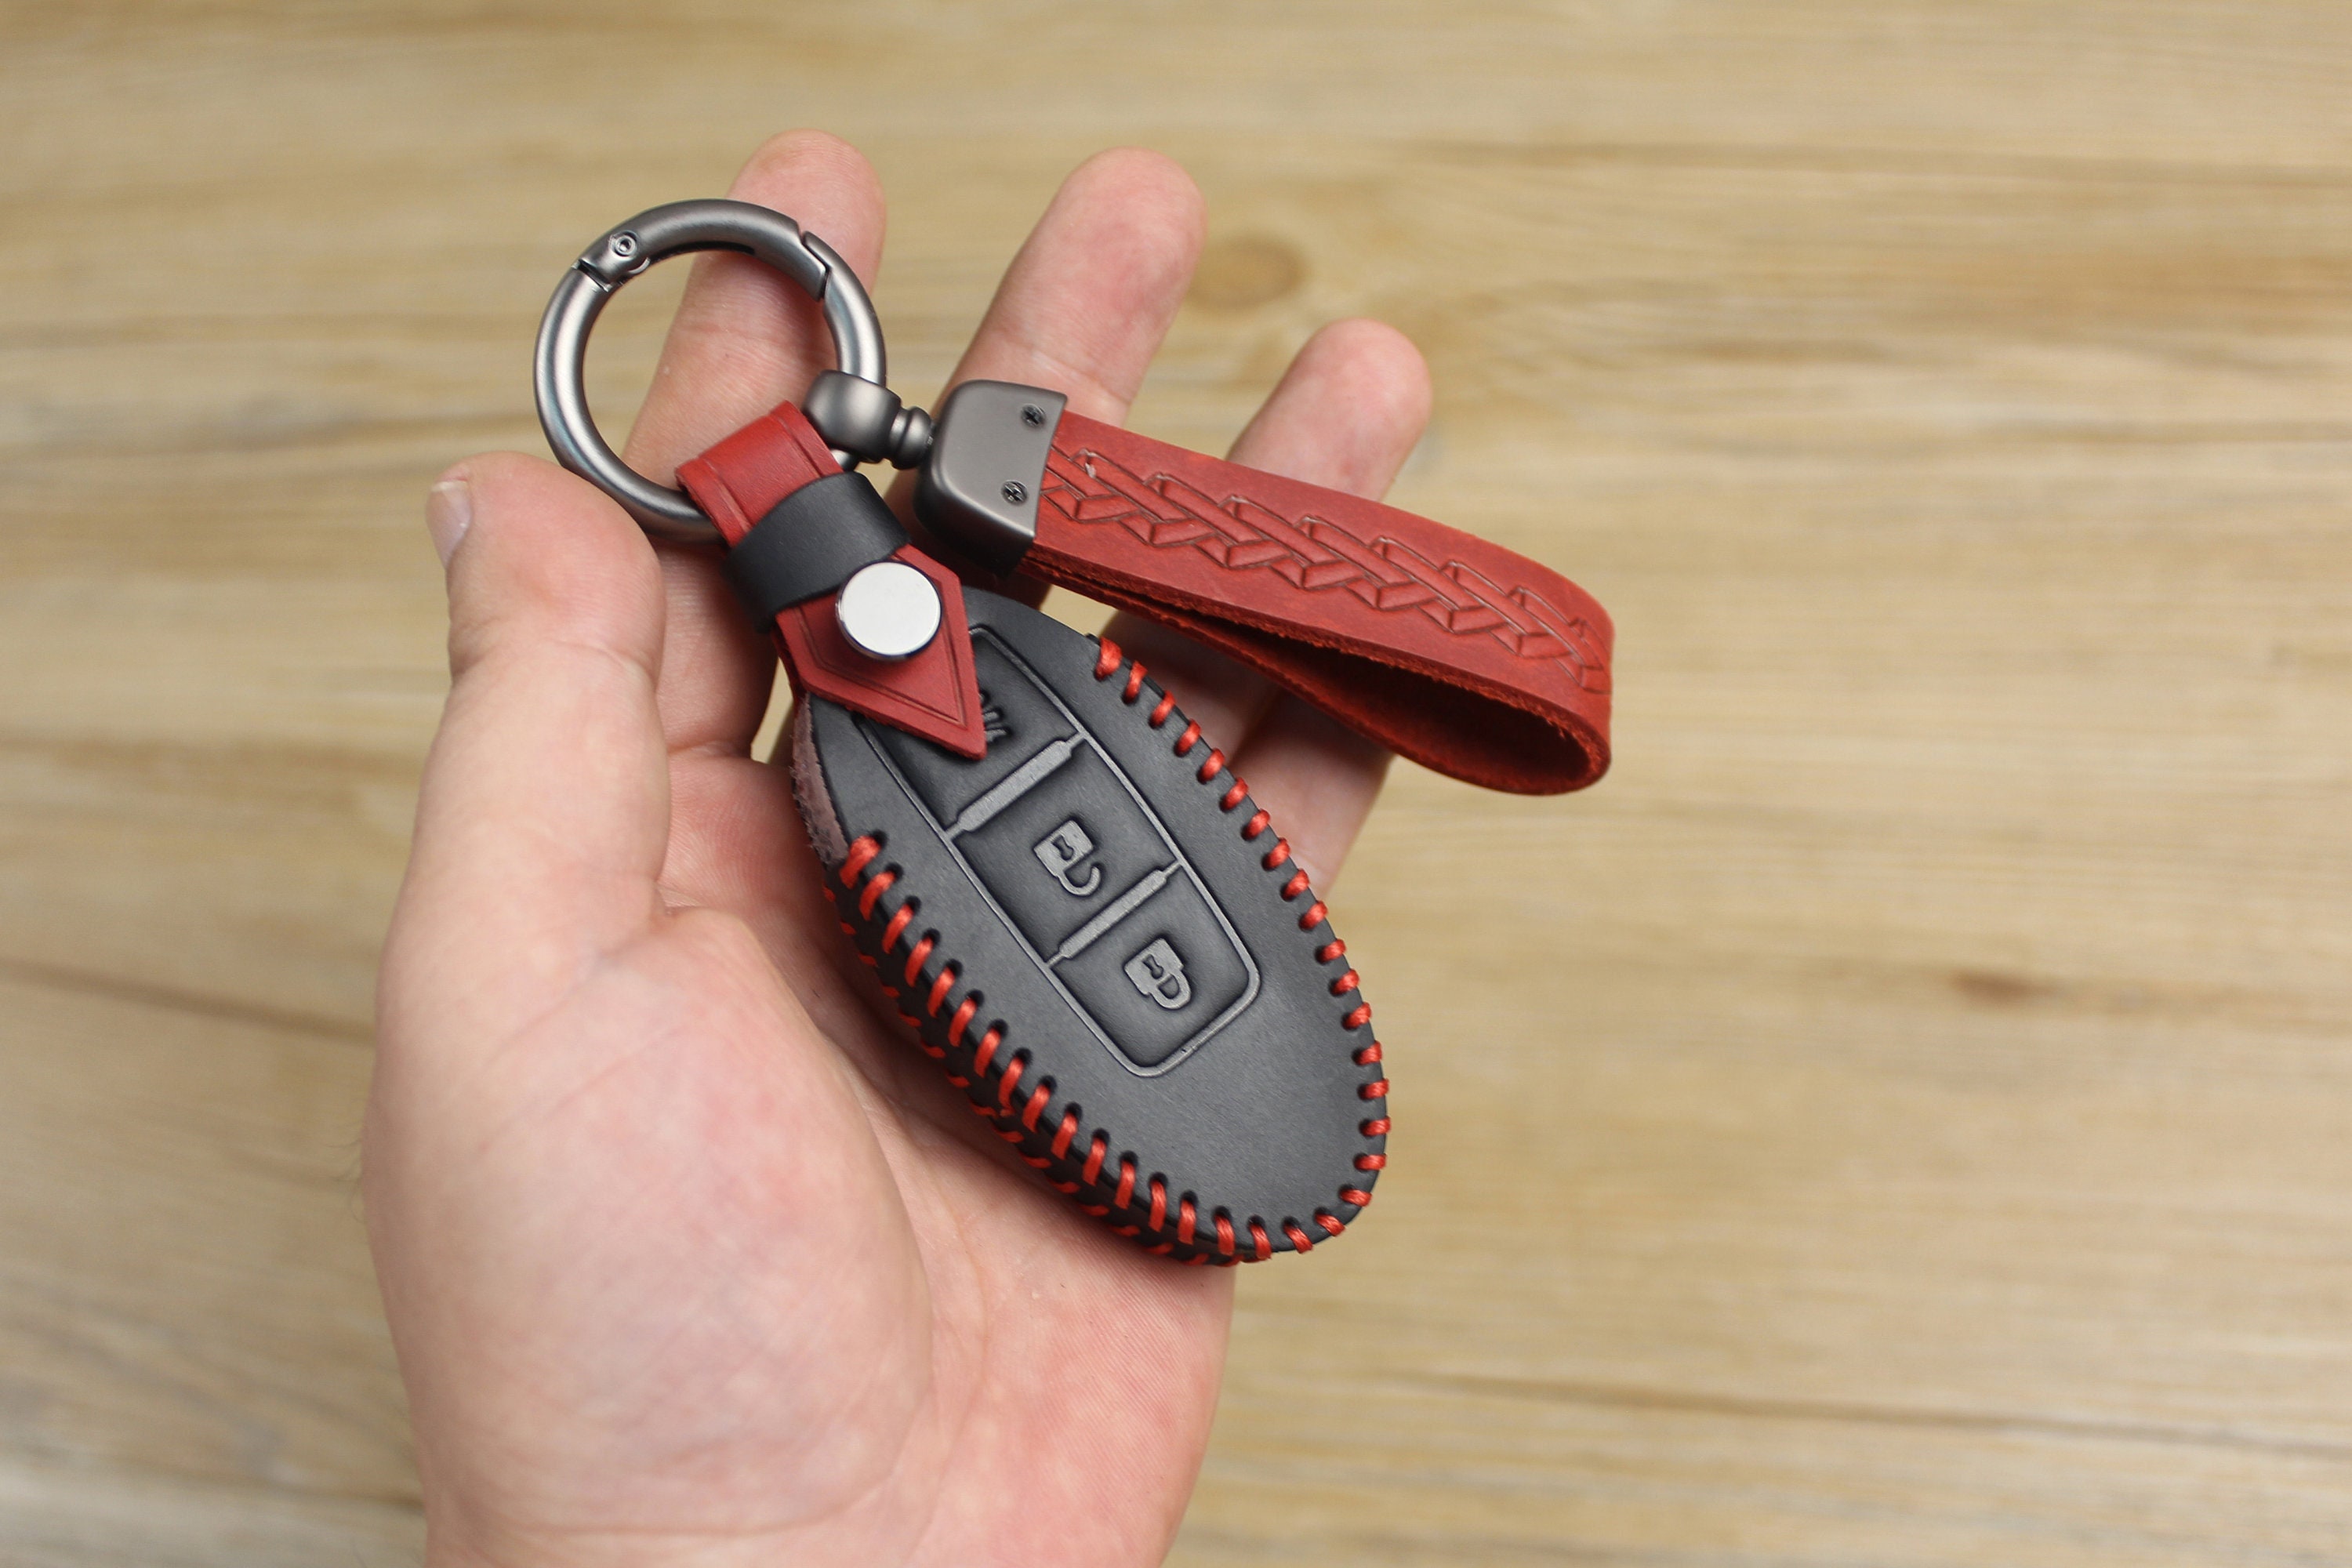 1set TPU Car Key Case & Keychain Compatible With Nissan, Key Fob Cover